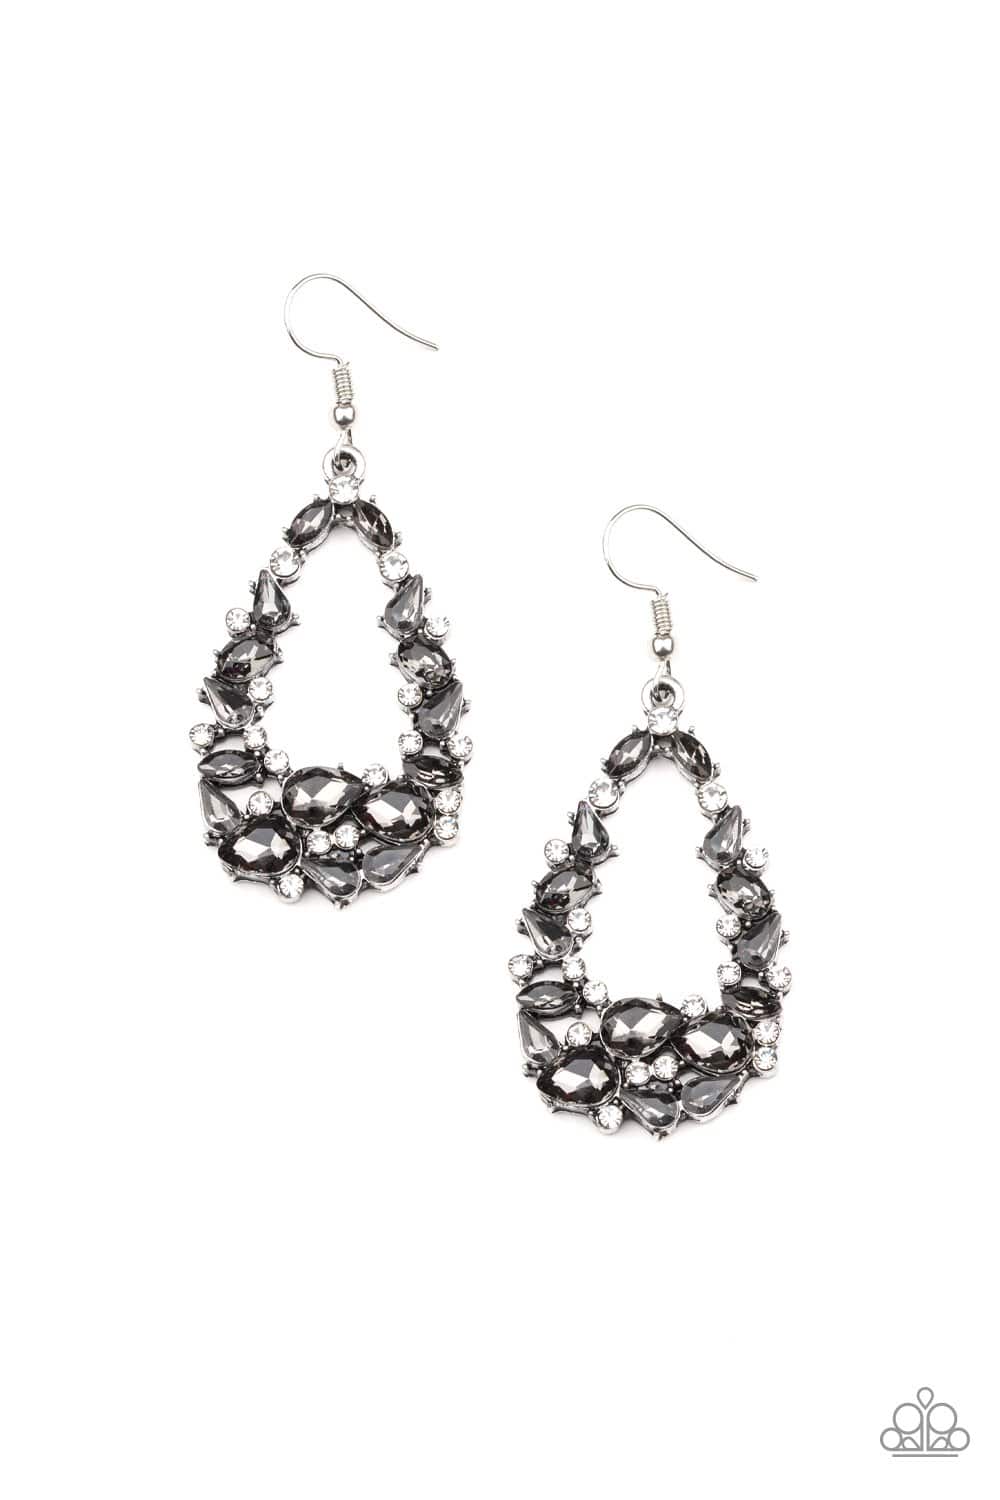 To BEDAZZLE, or Not To BEDAZZLE - Silver Rhinestone Earrings - Paparazzi Accessories - GlaMarous Titi Jewels